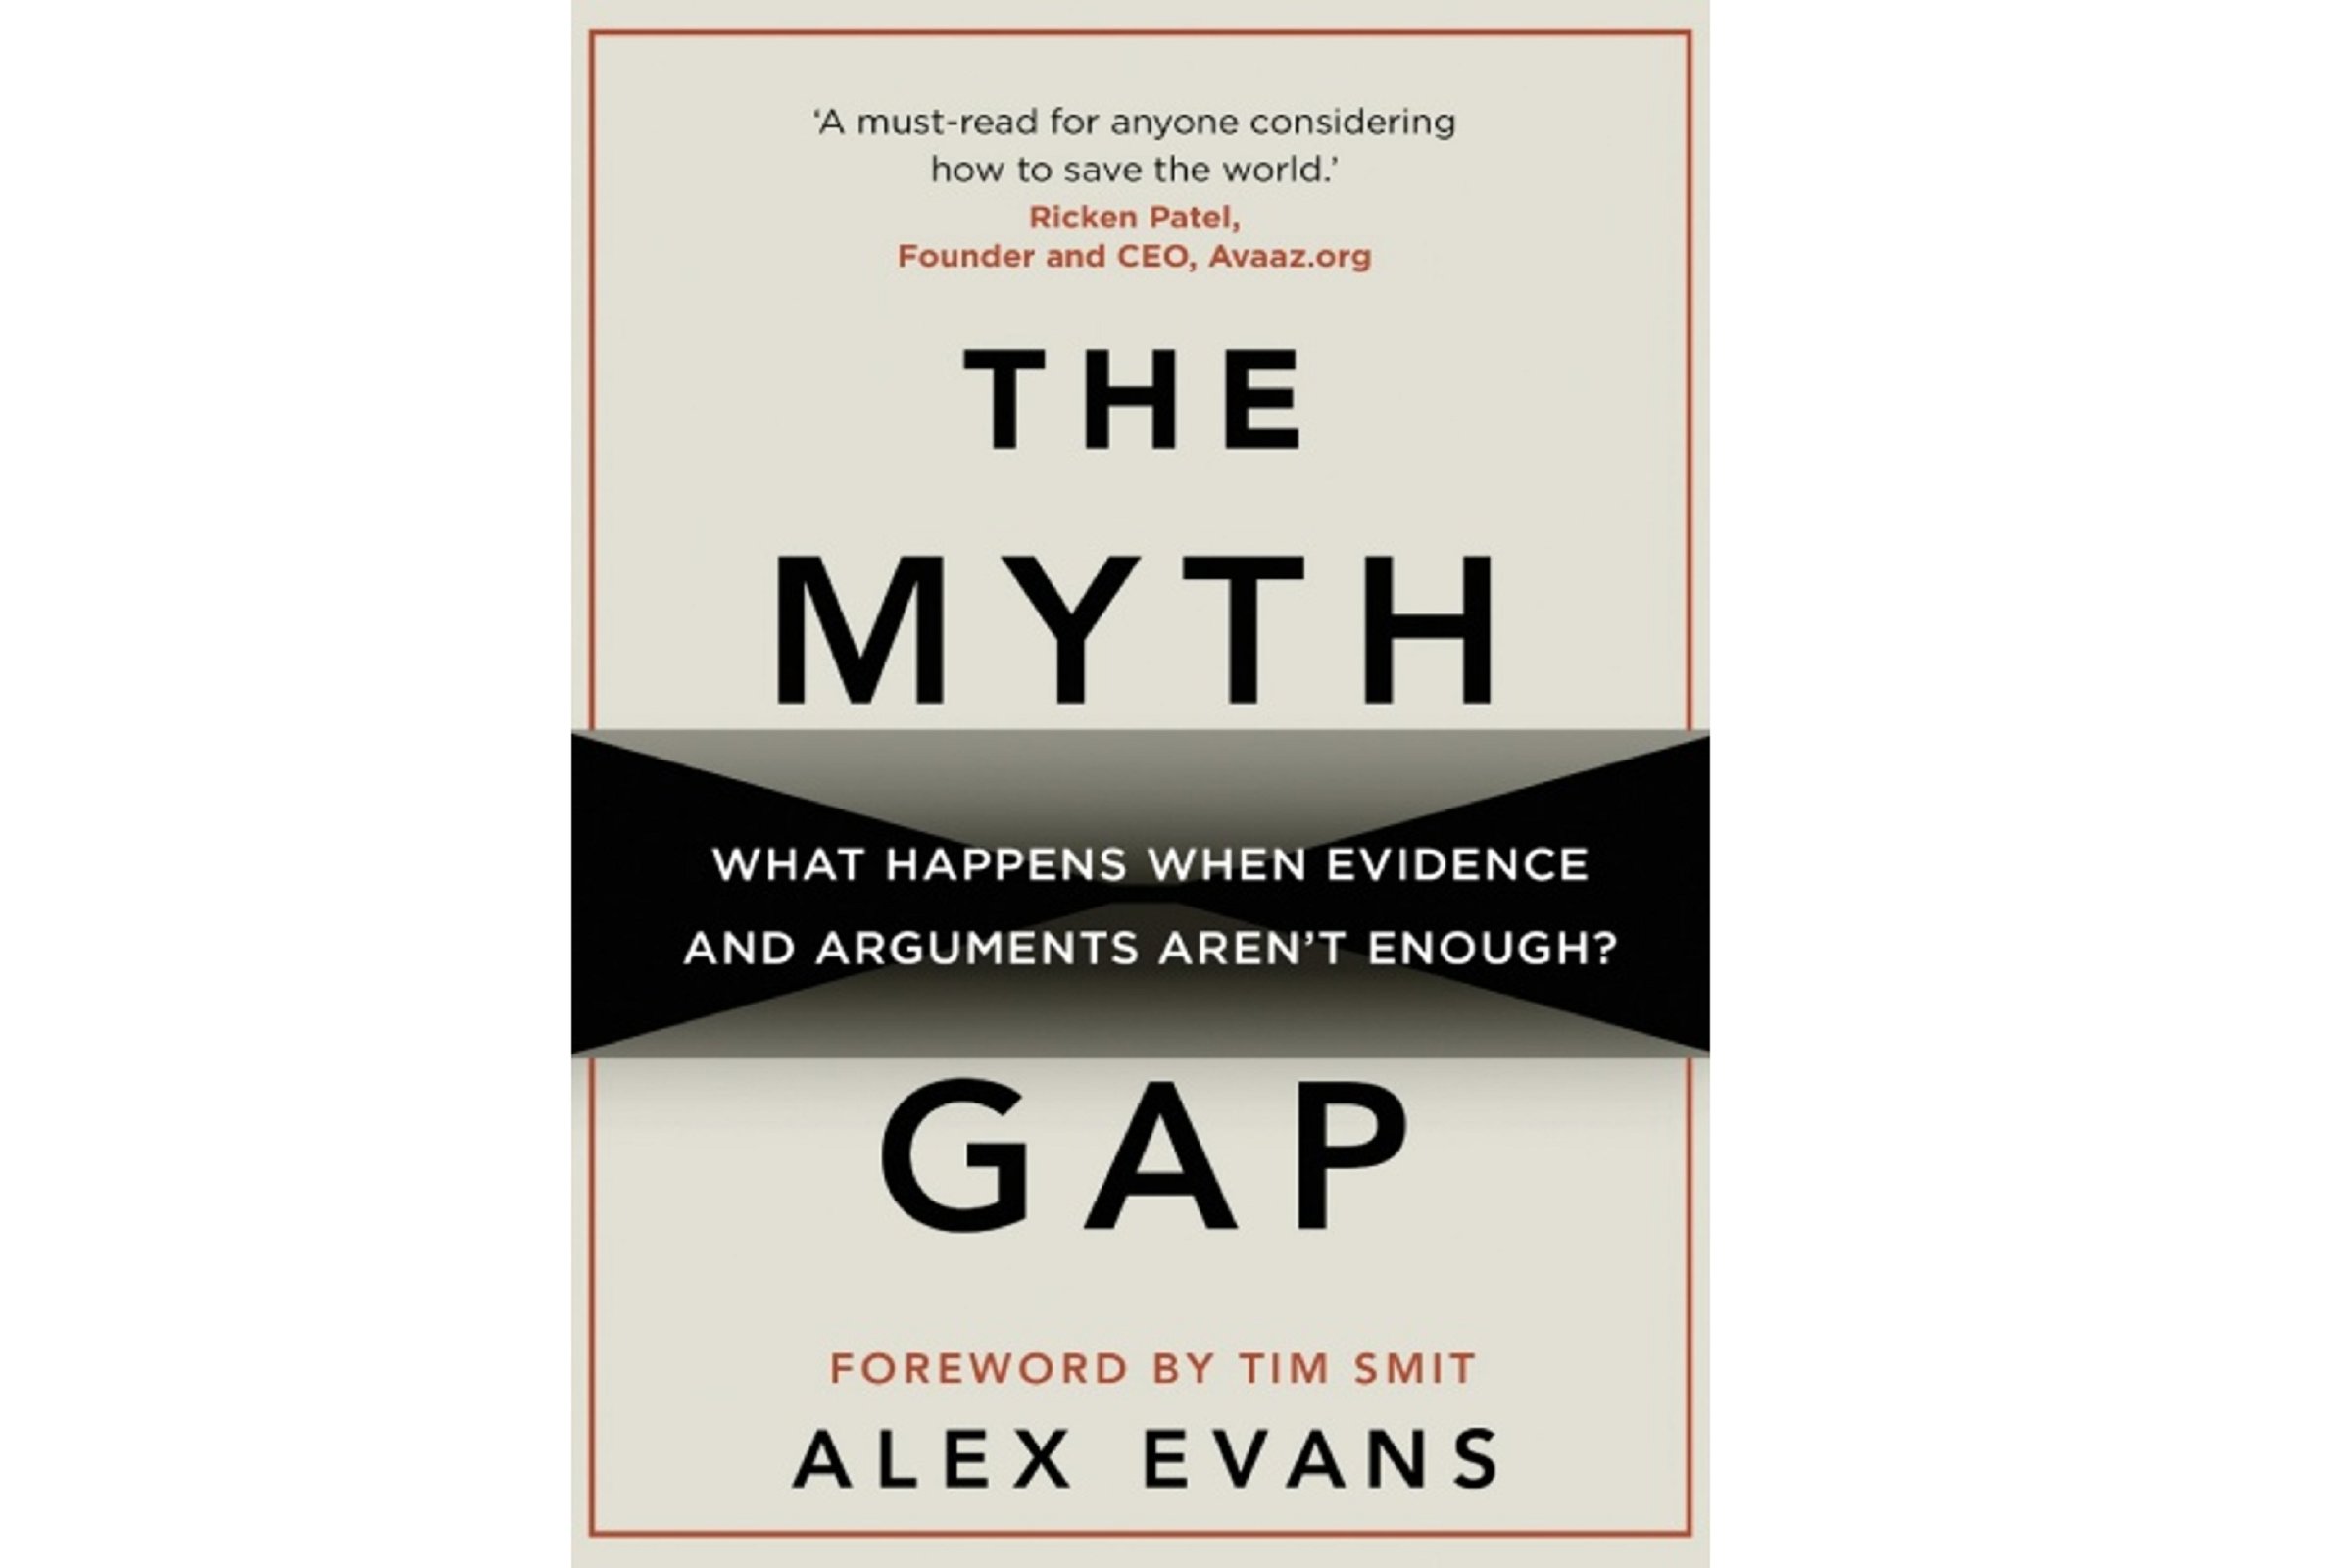 The Myth Gap: What Happens When Evidence and Arguments Aren’t Enough?